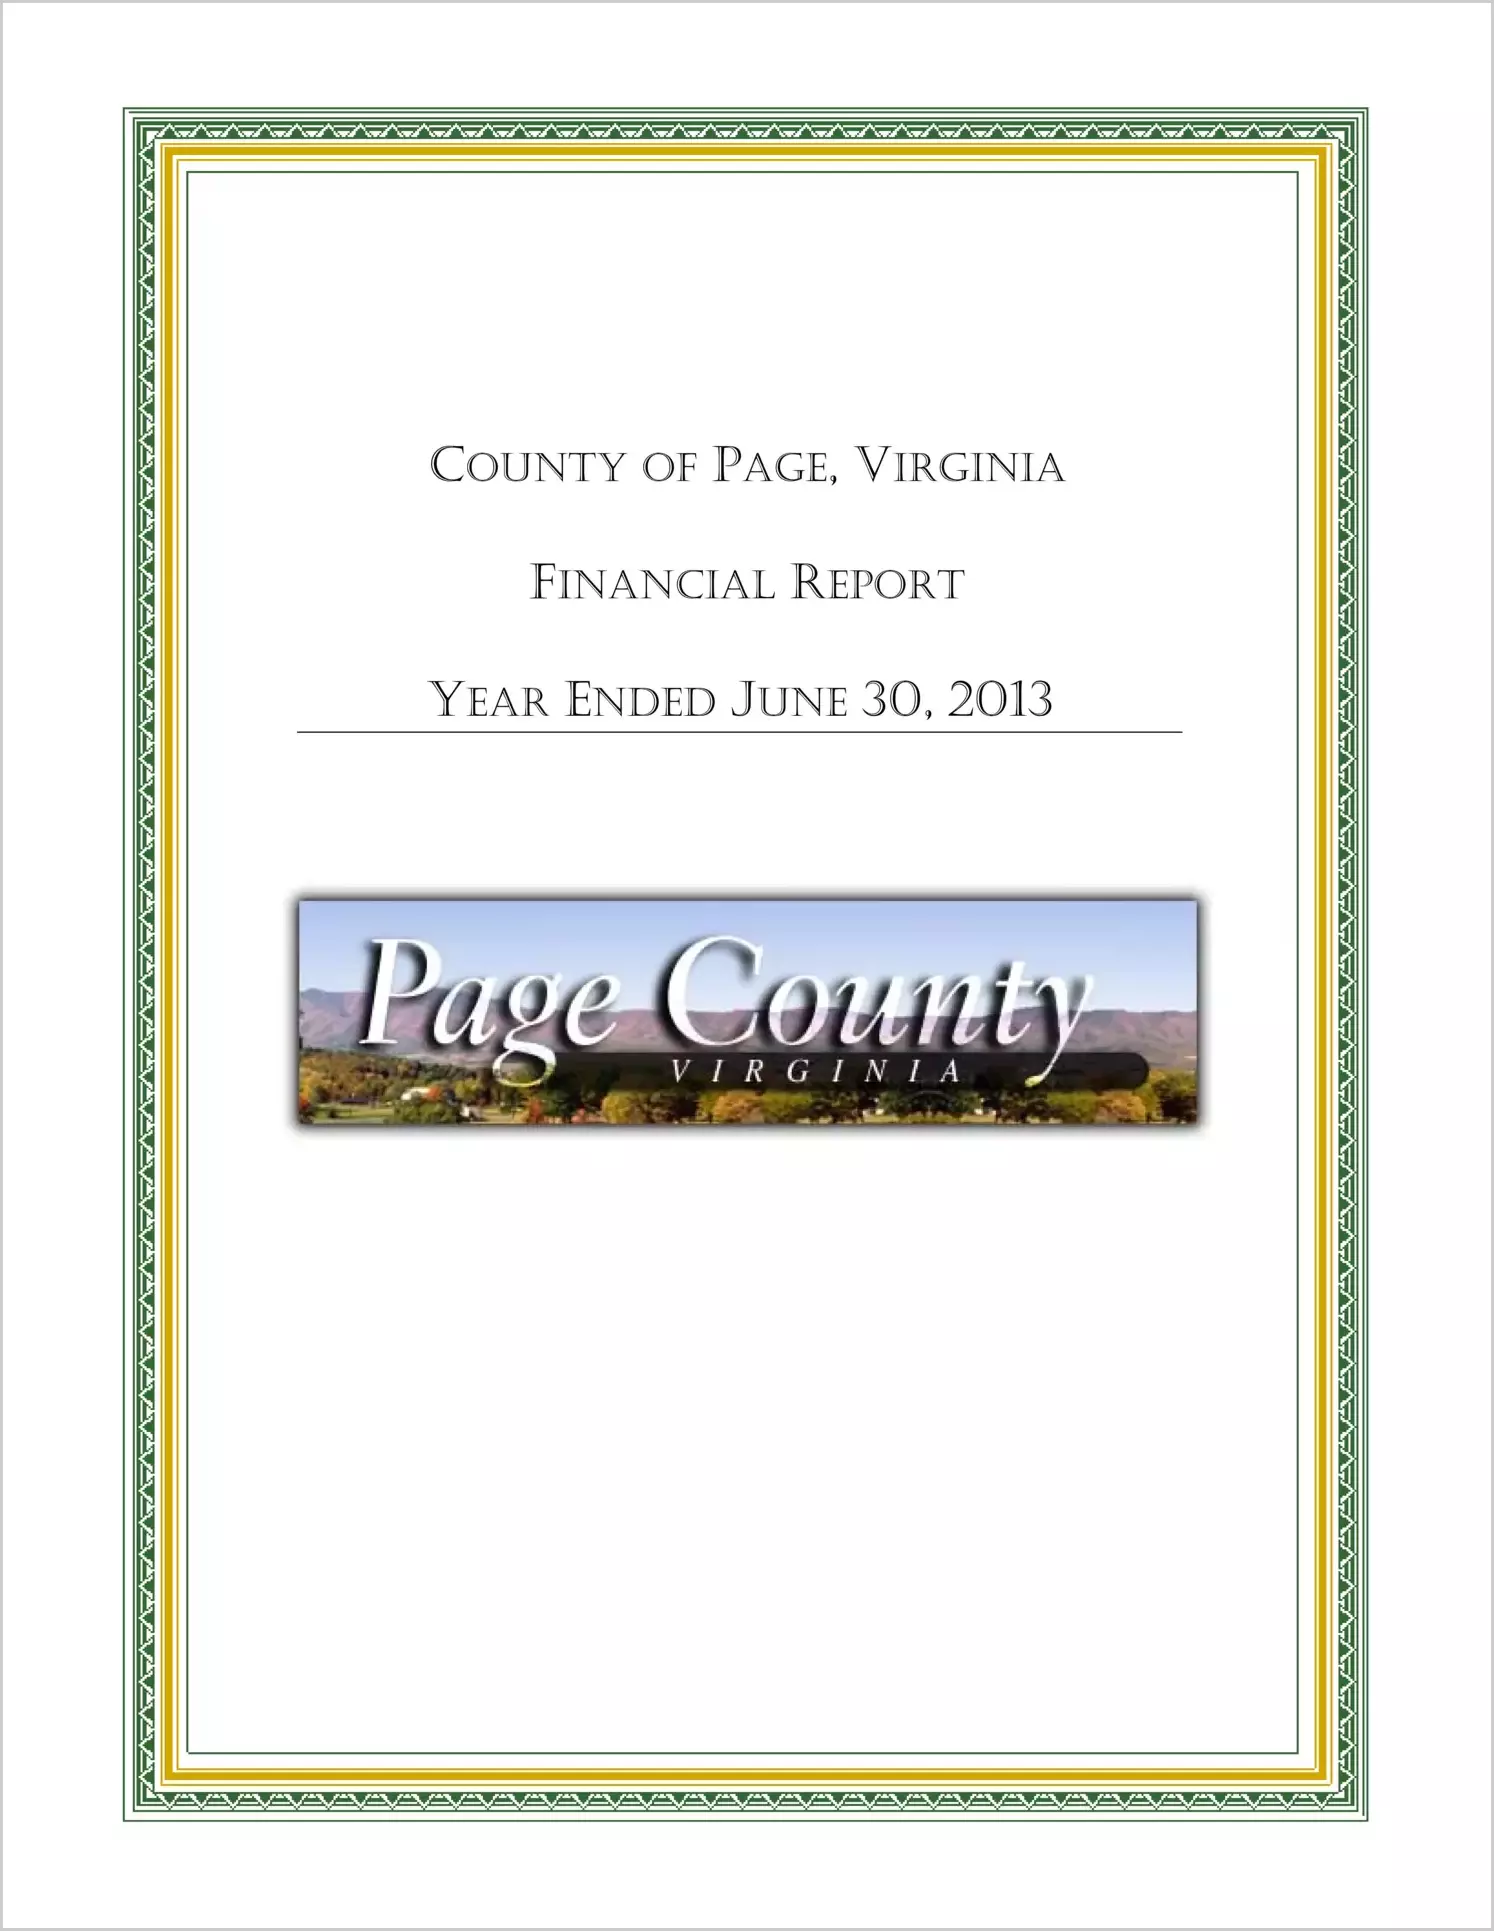 2013 Annual Financial Report for County of Page